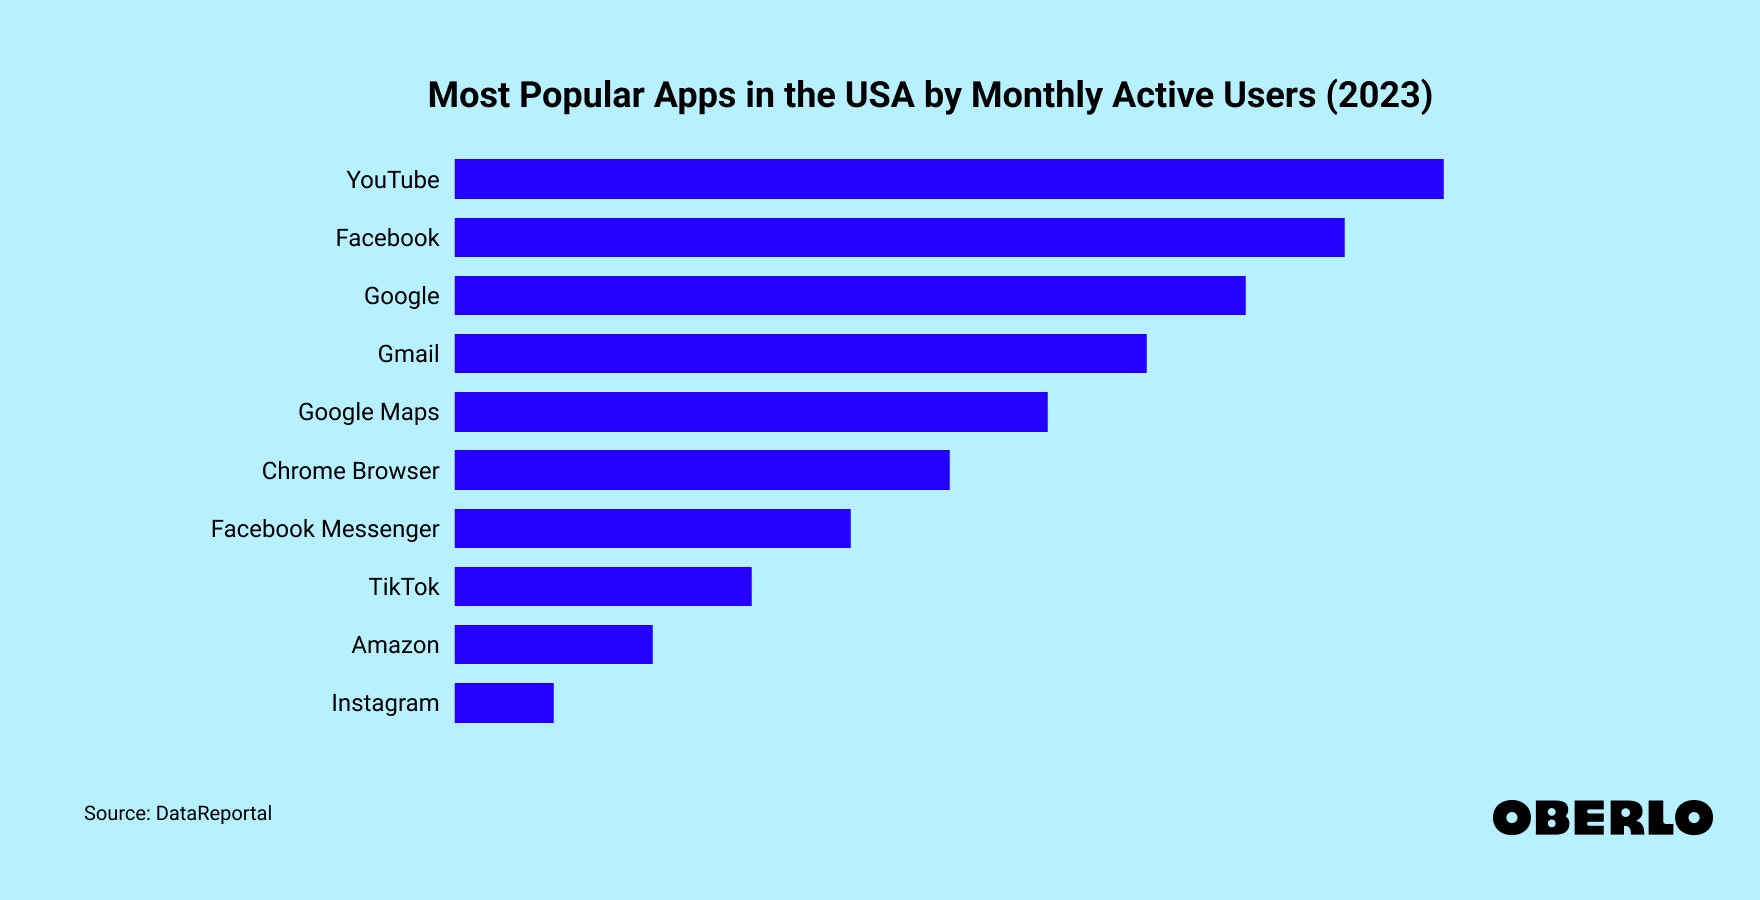 Chart showing: Most popular apps in the USA by monthly users: 2023